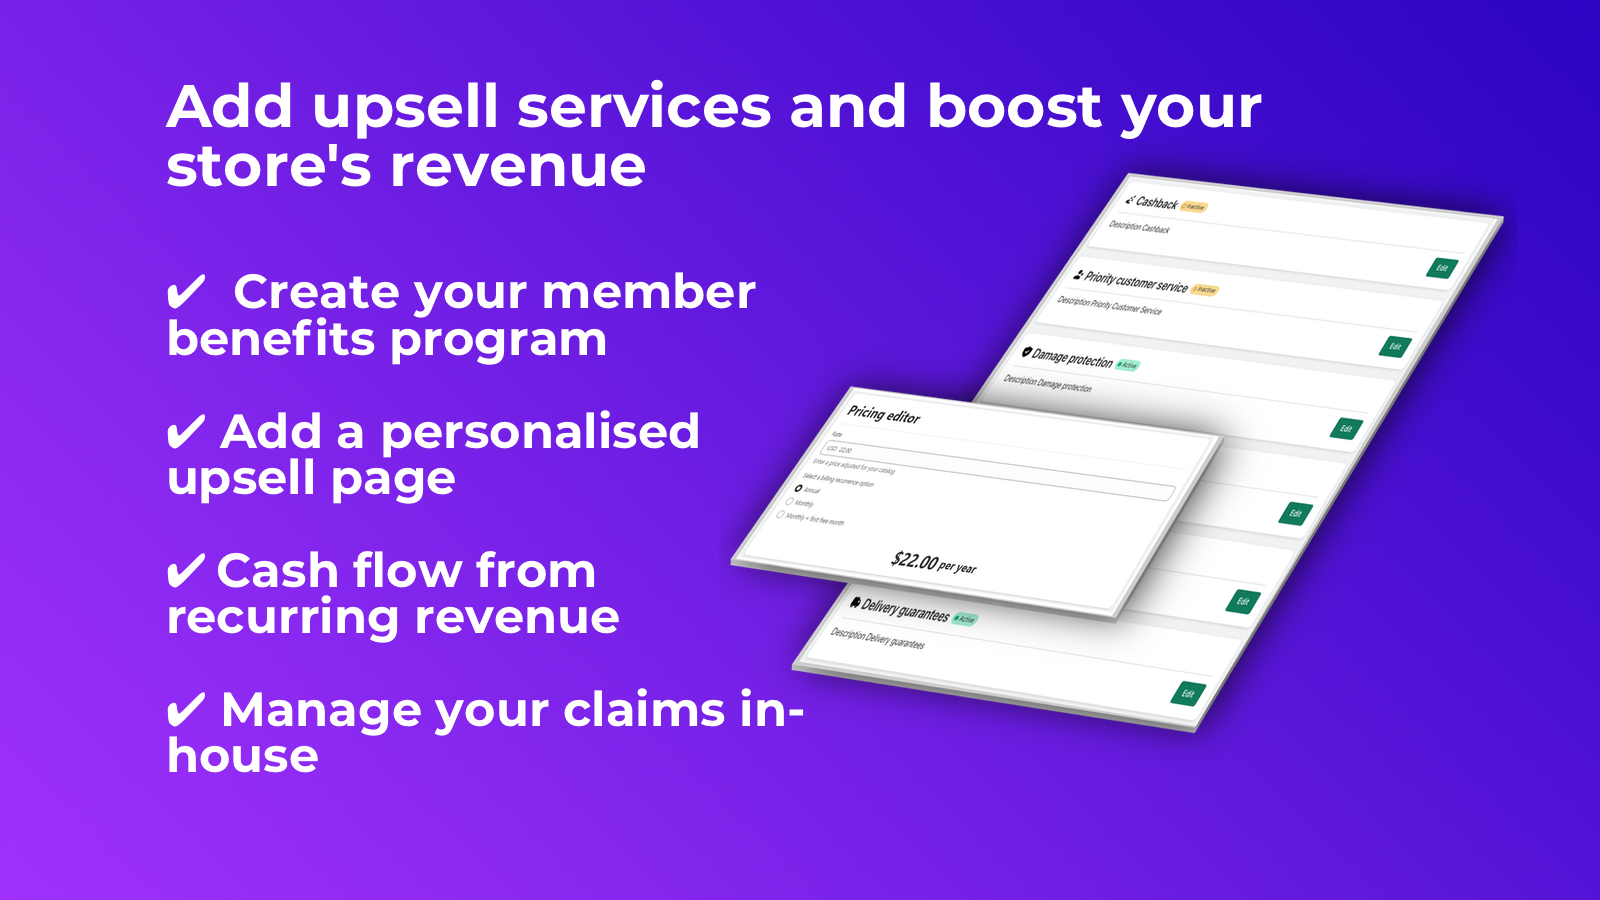 Add upsell services and boost your store's revenue